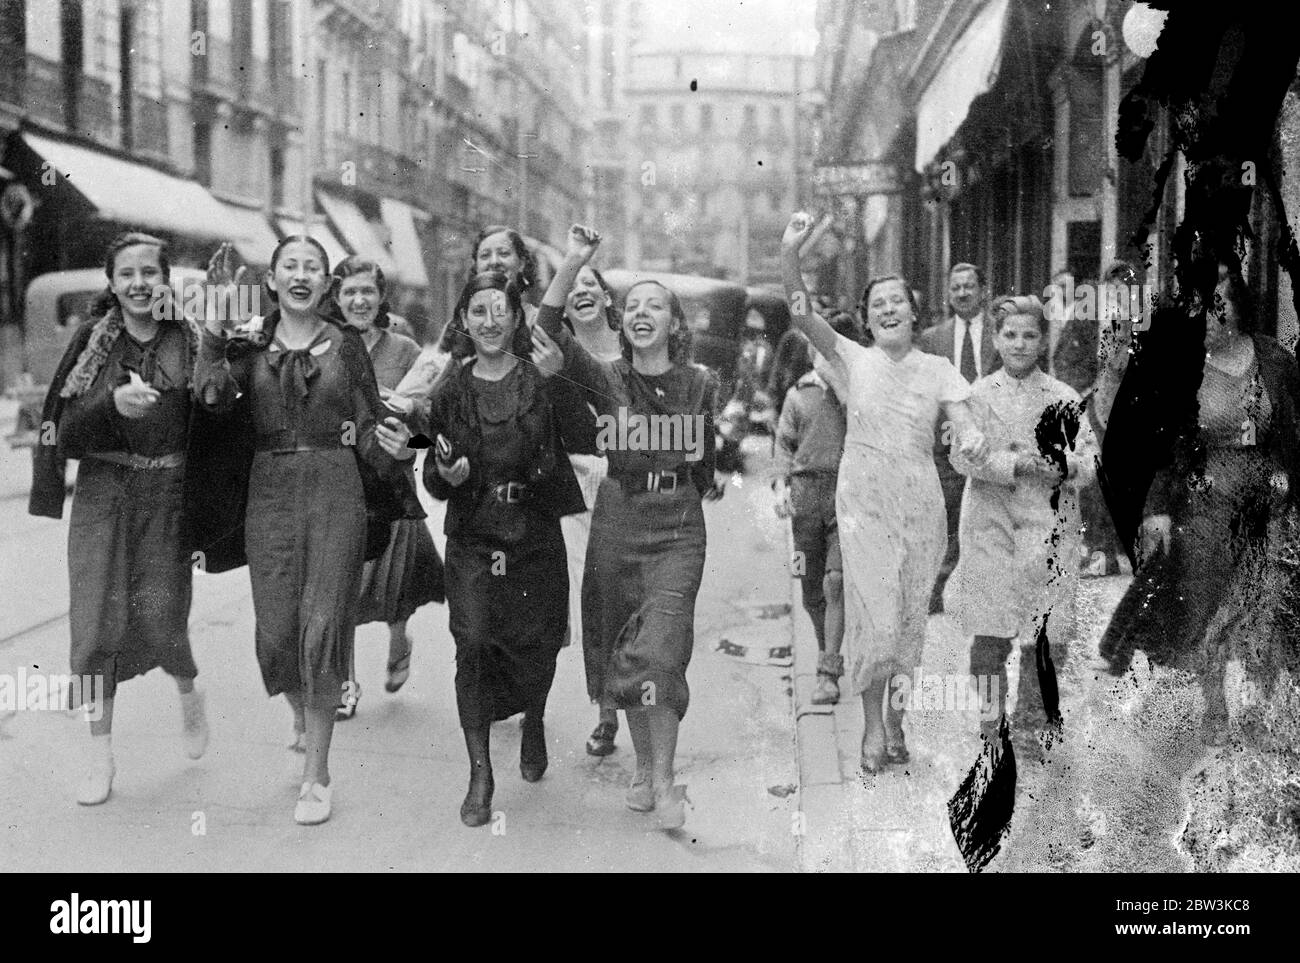 Girl dressmakers join strikers in Madrid , parade through town demanding general stoppage . Girls engaged in the millinery and dressmaking trades in Madrid have joined the strike movememnt which is sweeping the country and is involving workers in industries as far removed as coal mining , agriculture and even bull fighting , and has already cost many lives . The girls marched through the streets of the city shouting a demand that all workers in the dressmaking trades should join the strike . Photo shows , shouting girl milliners parading through Madrid . 18 June 1936 Stock Photo